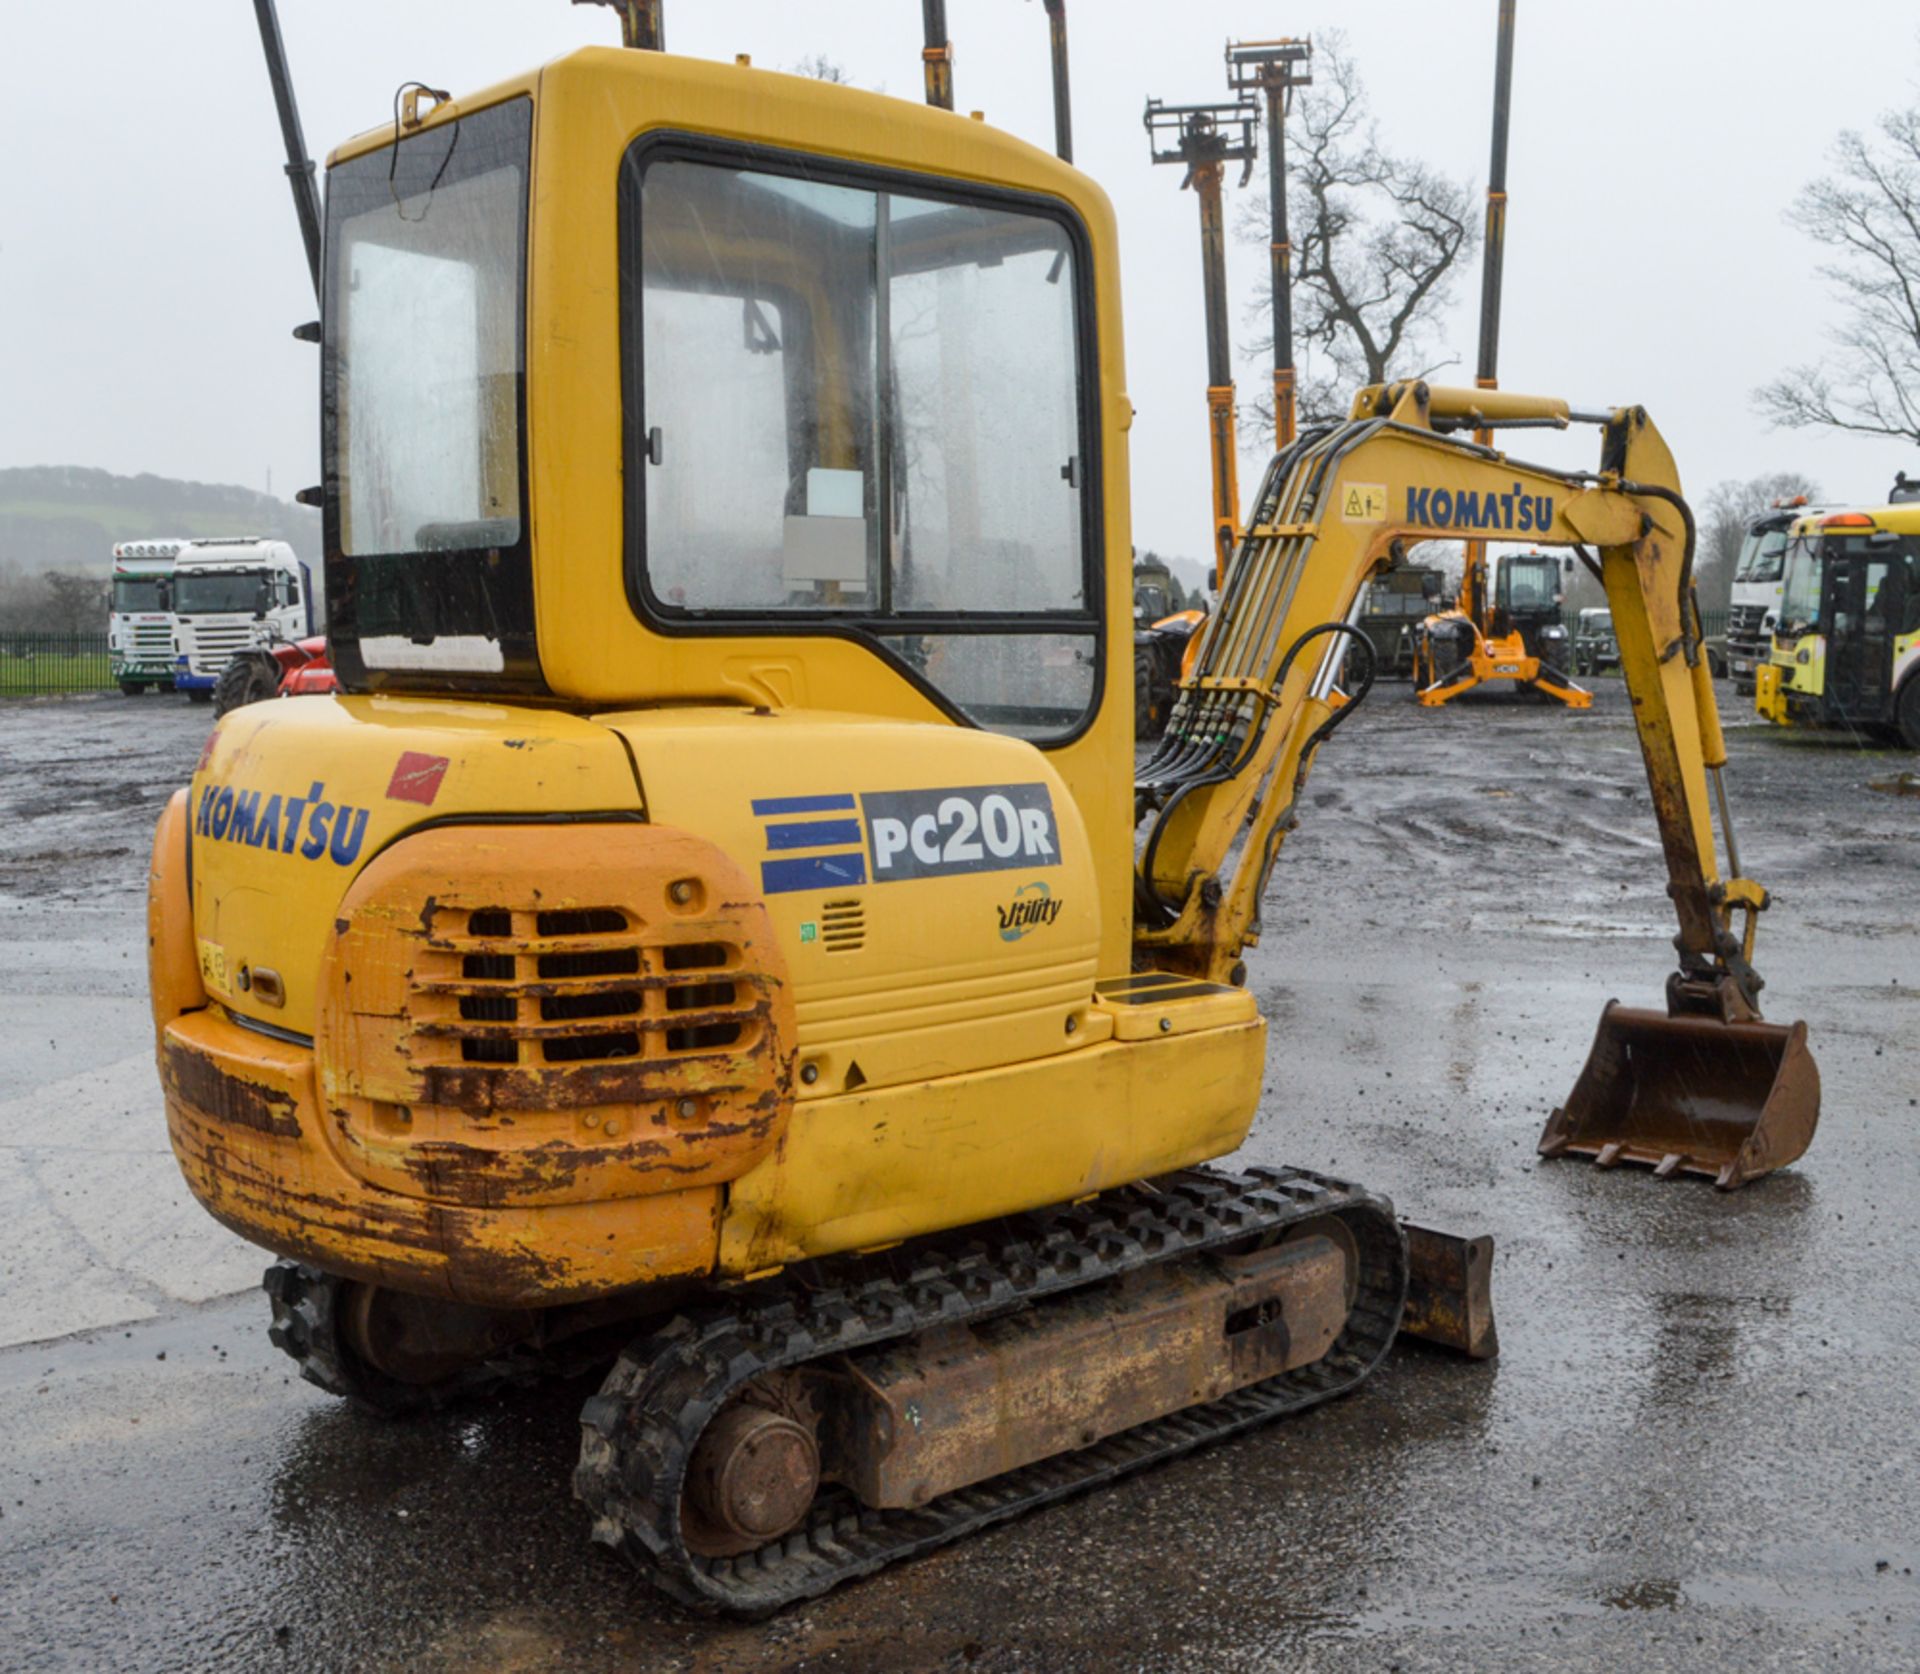 Komatsu PC20R 2.5 tonne rubber tracked mini excavator Year: 2004 S/N: 31719 Recorded Hours: 2941 - Image 3 of 11